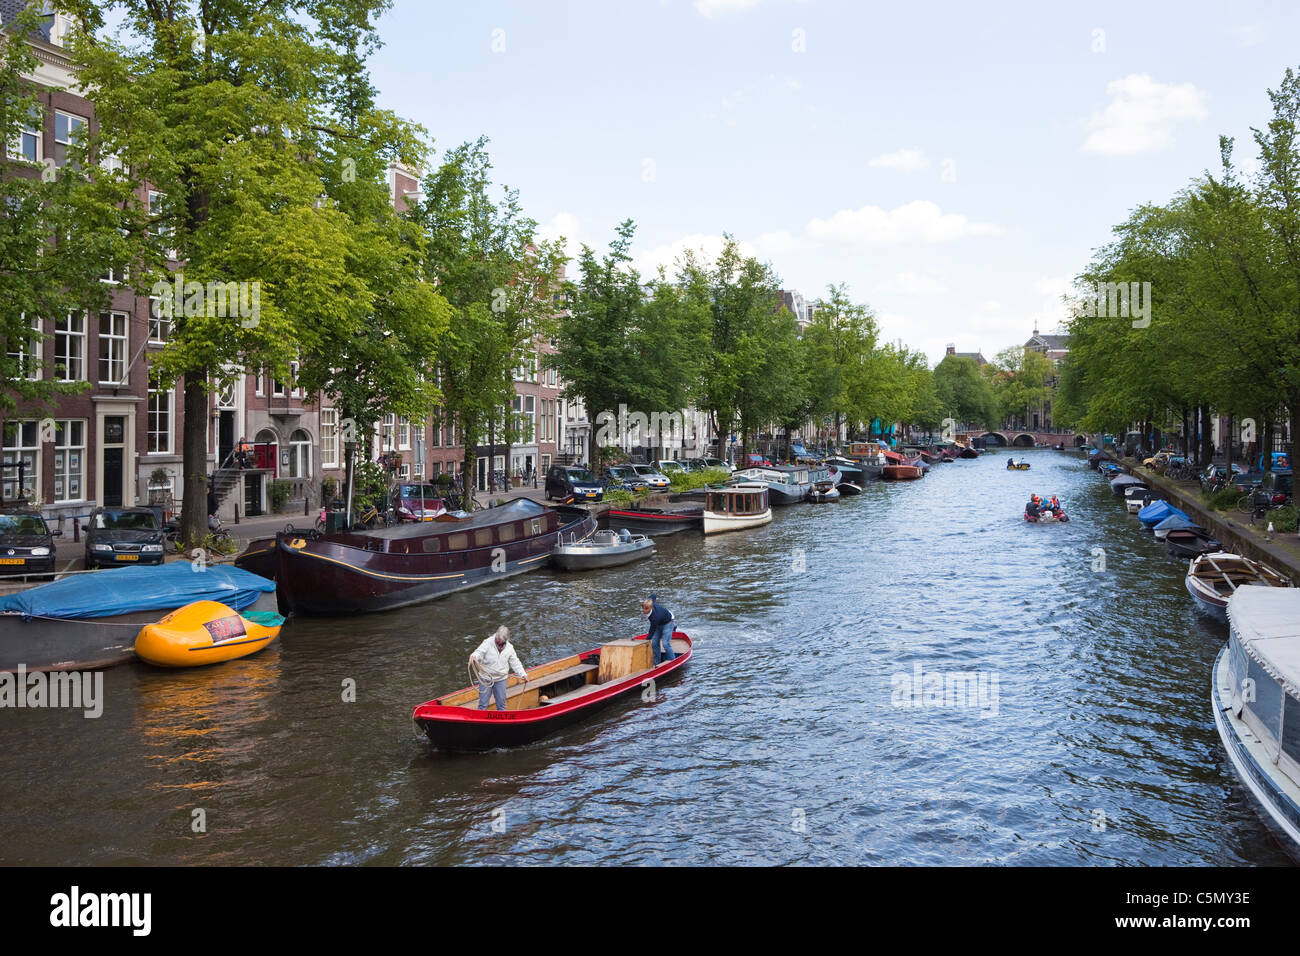 Small barge sailing on a city canal, Amsterdam, Netherlands Stock Photo